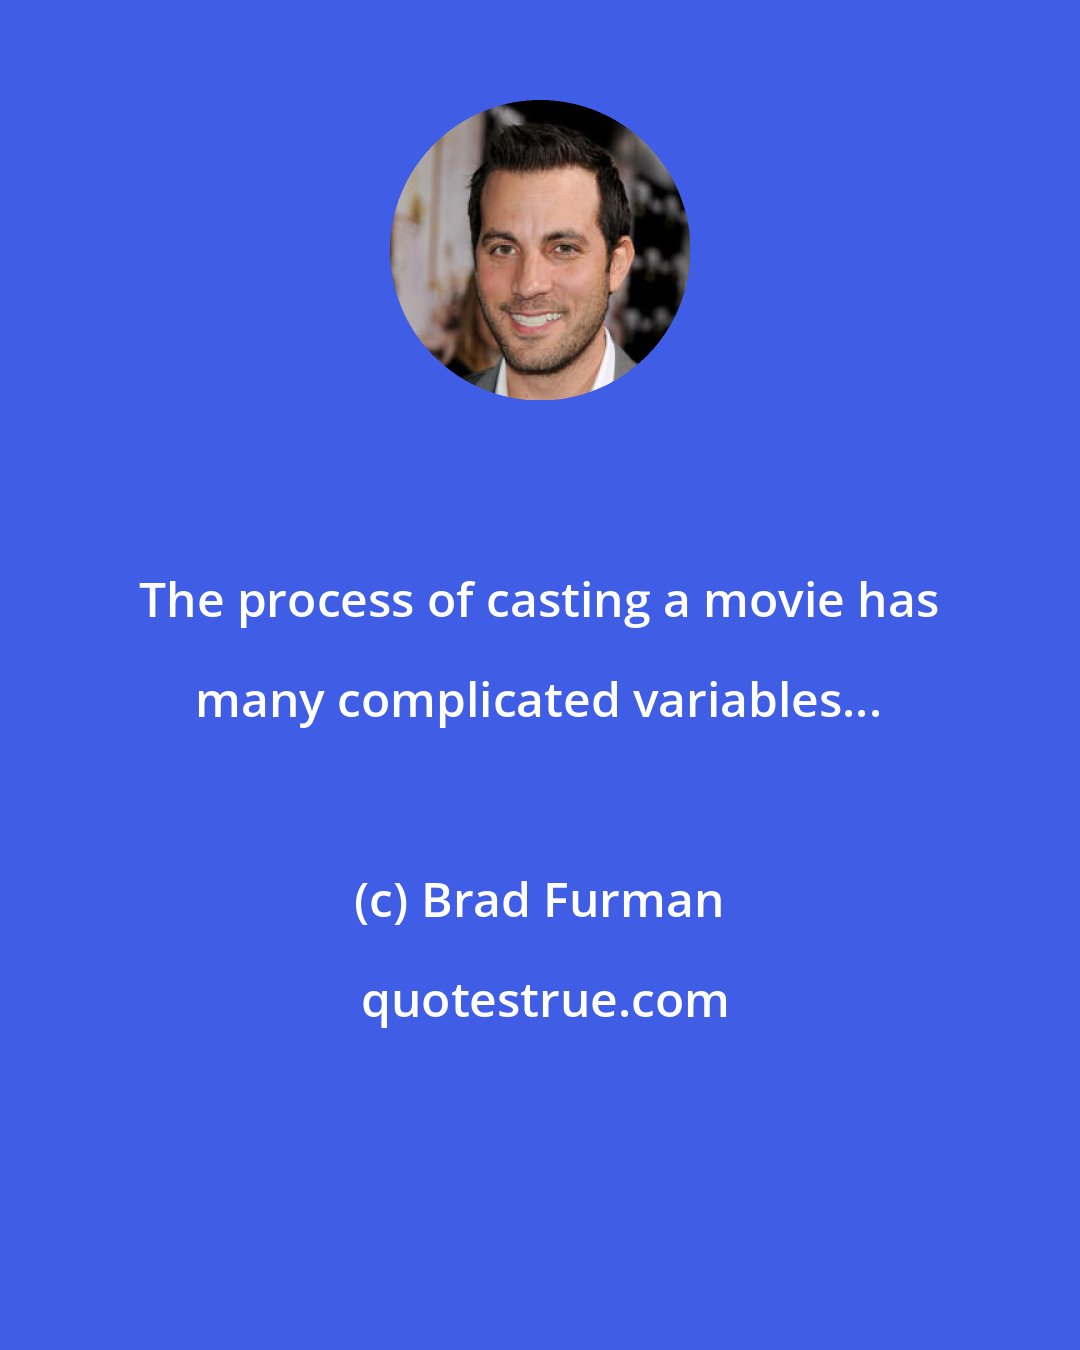 Brad Furman: The process of casting a movie has many complicated variables...